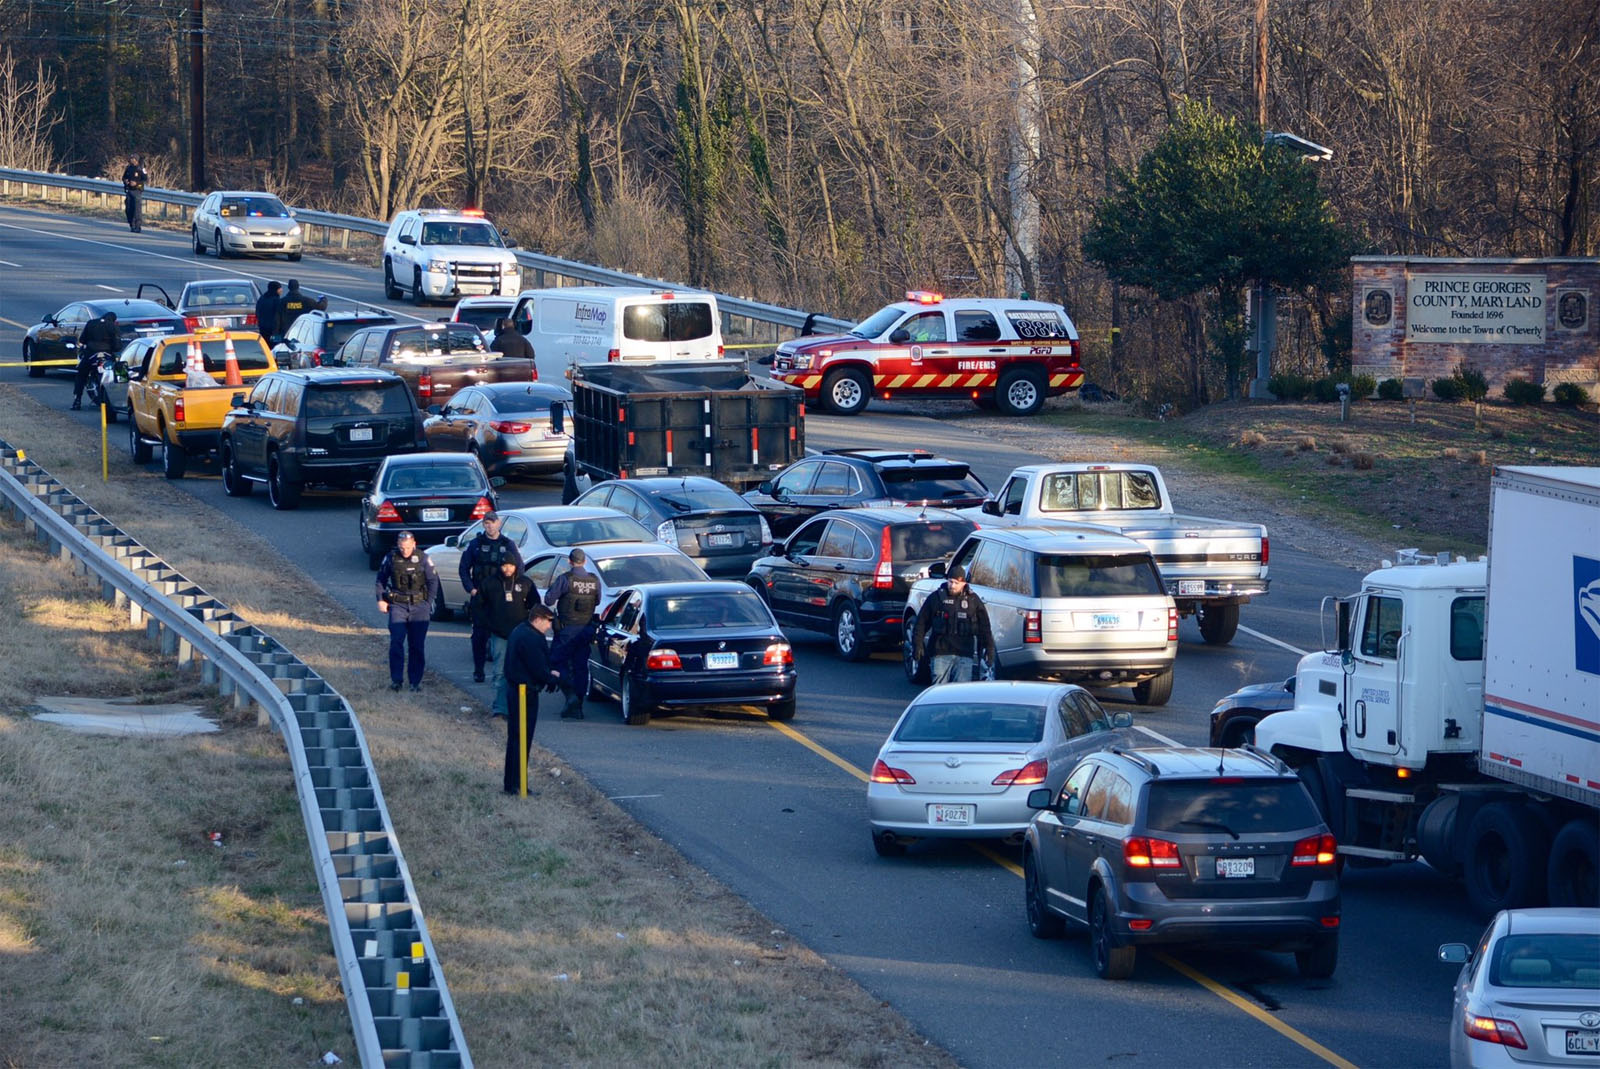 Prince George's Co. police investigate a shooting on Route 50 Thursday afternoon. (WTOP/Dave Dildine)